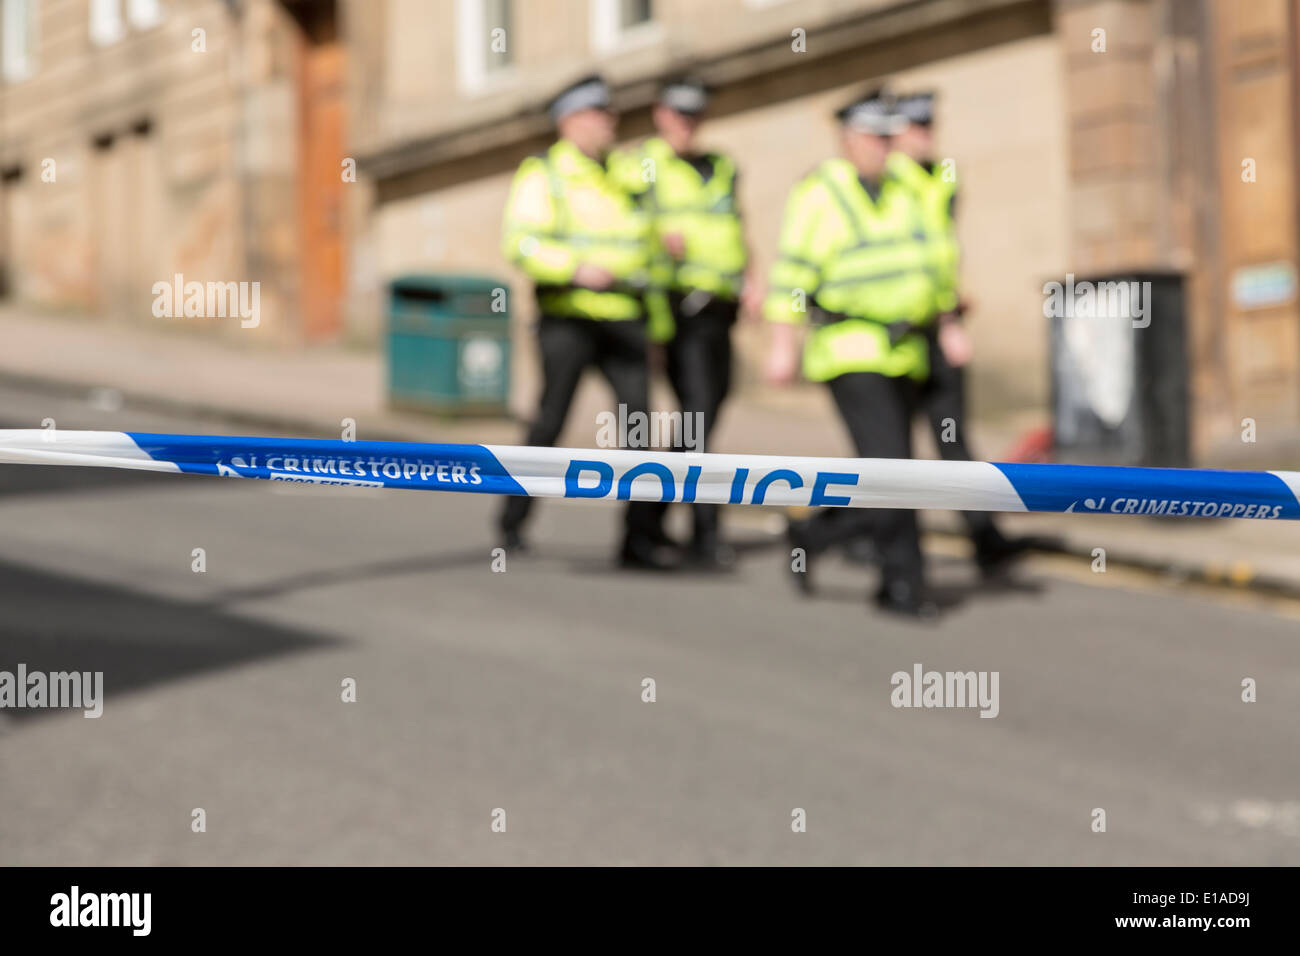 Strathclyde Police tape cordon restricting access to a crime scene. Out of focus/blurred police officers walking background Stock Photo